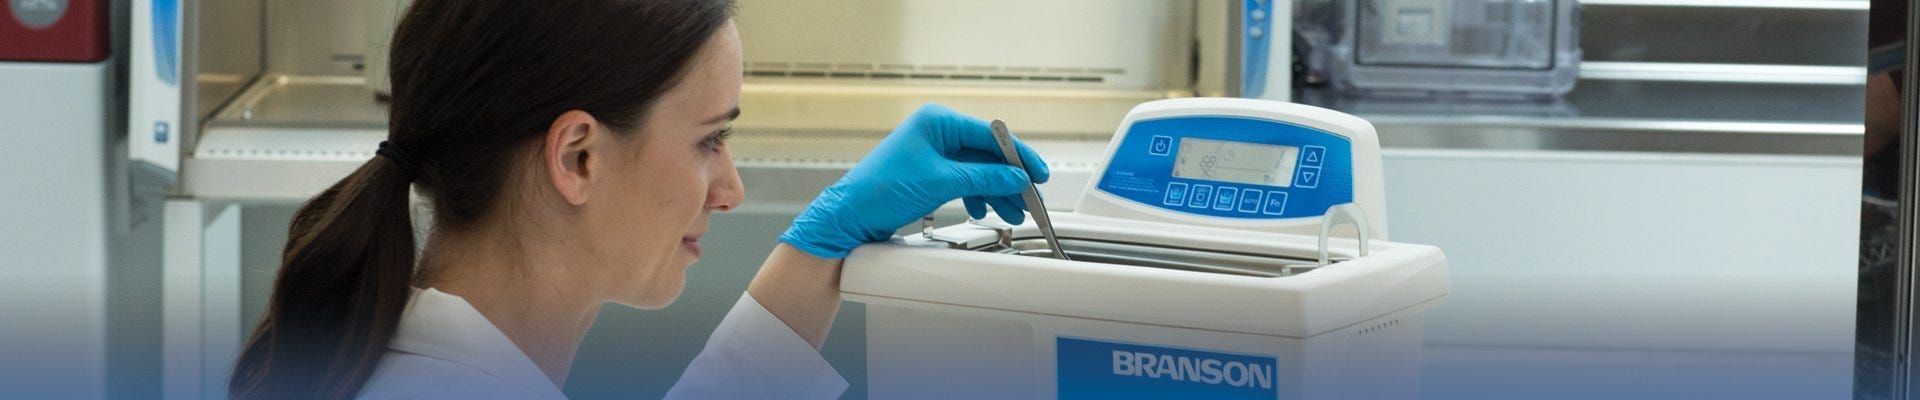 Ultrasonic cleaners offer a full range of features to meet the most precise cleaning requirements